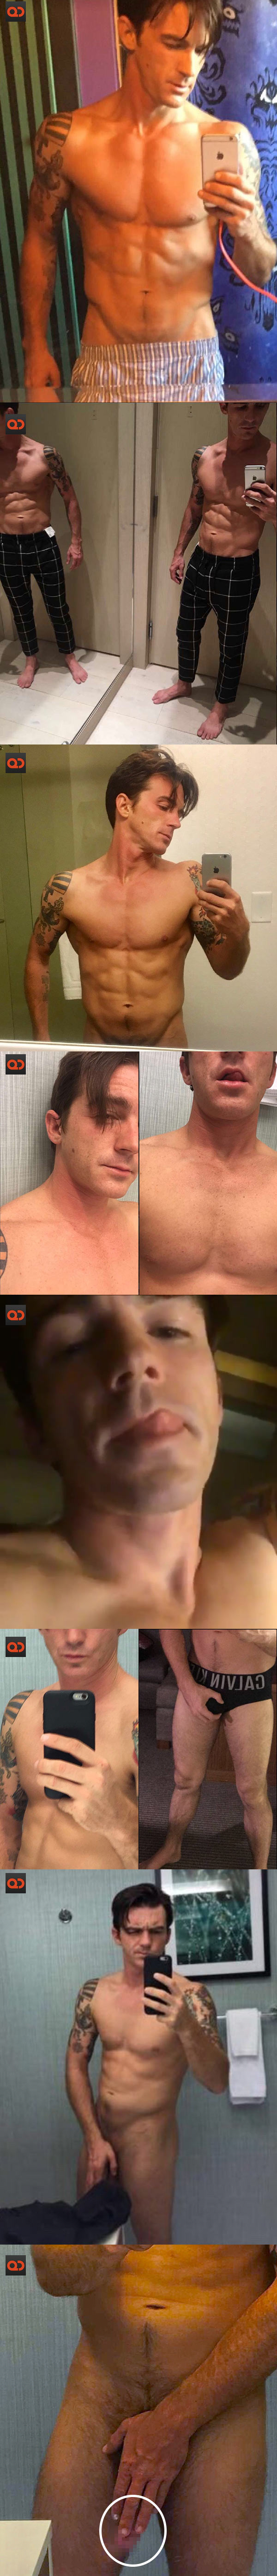 Drake Bell, Singer And Former Nickelodeon Star From TV Show “Drake And Show”,  Alleged Photos Of His Hard Cock Surface!